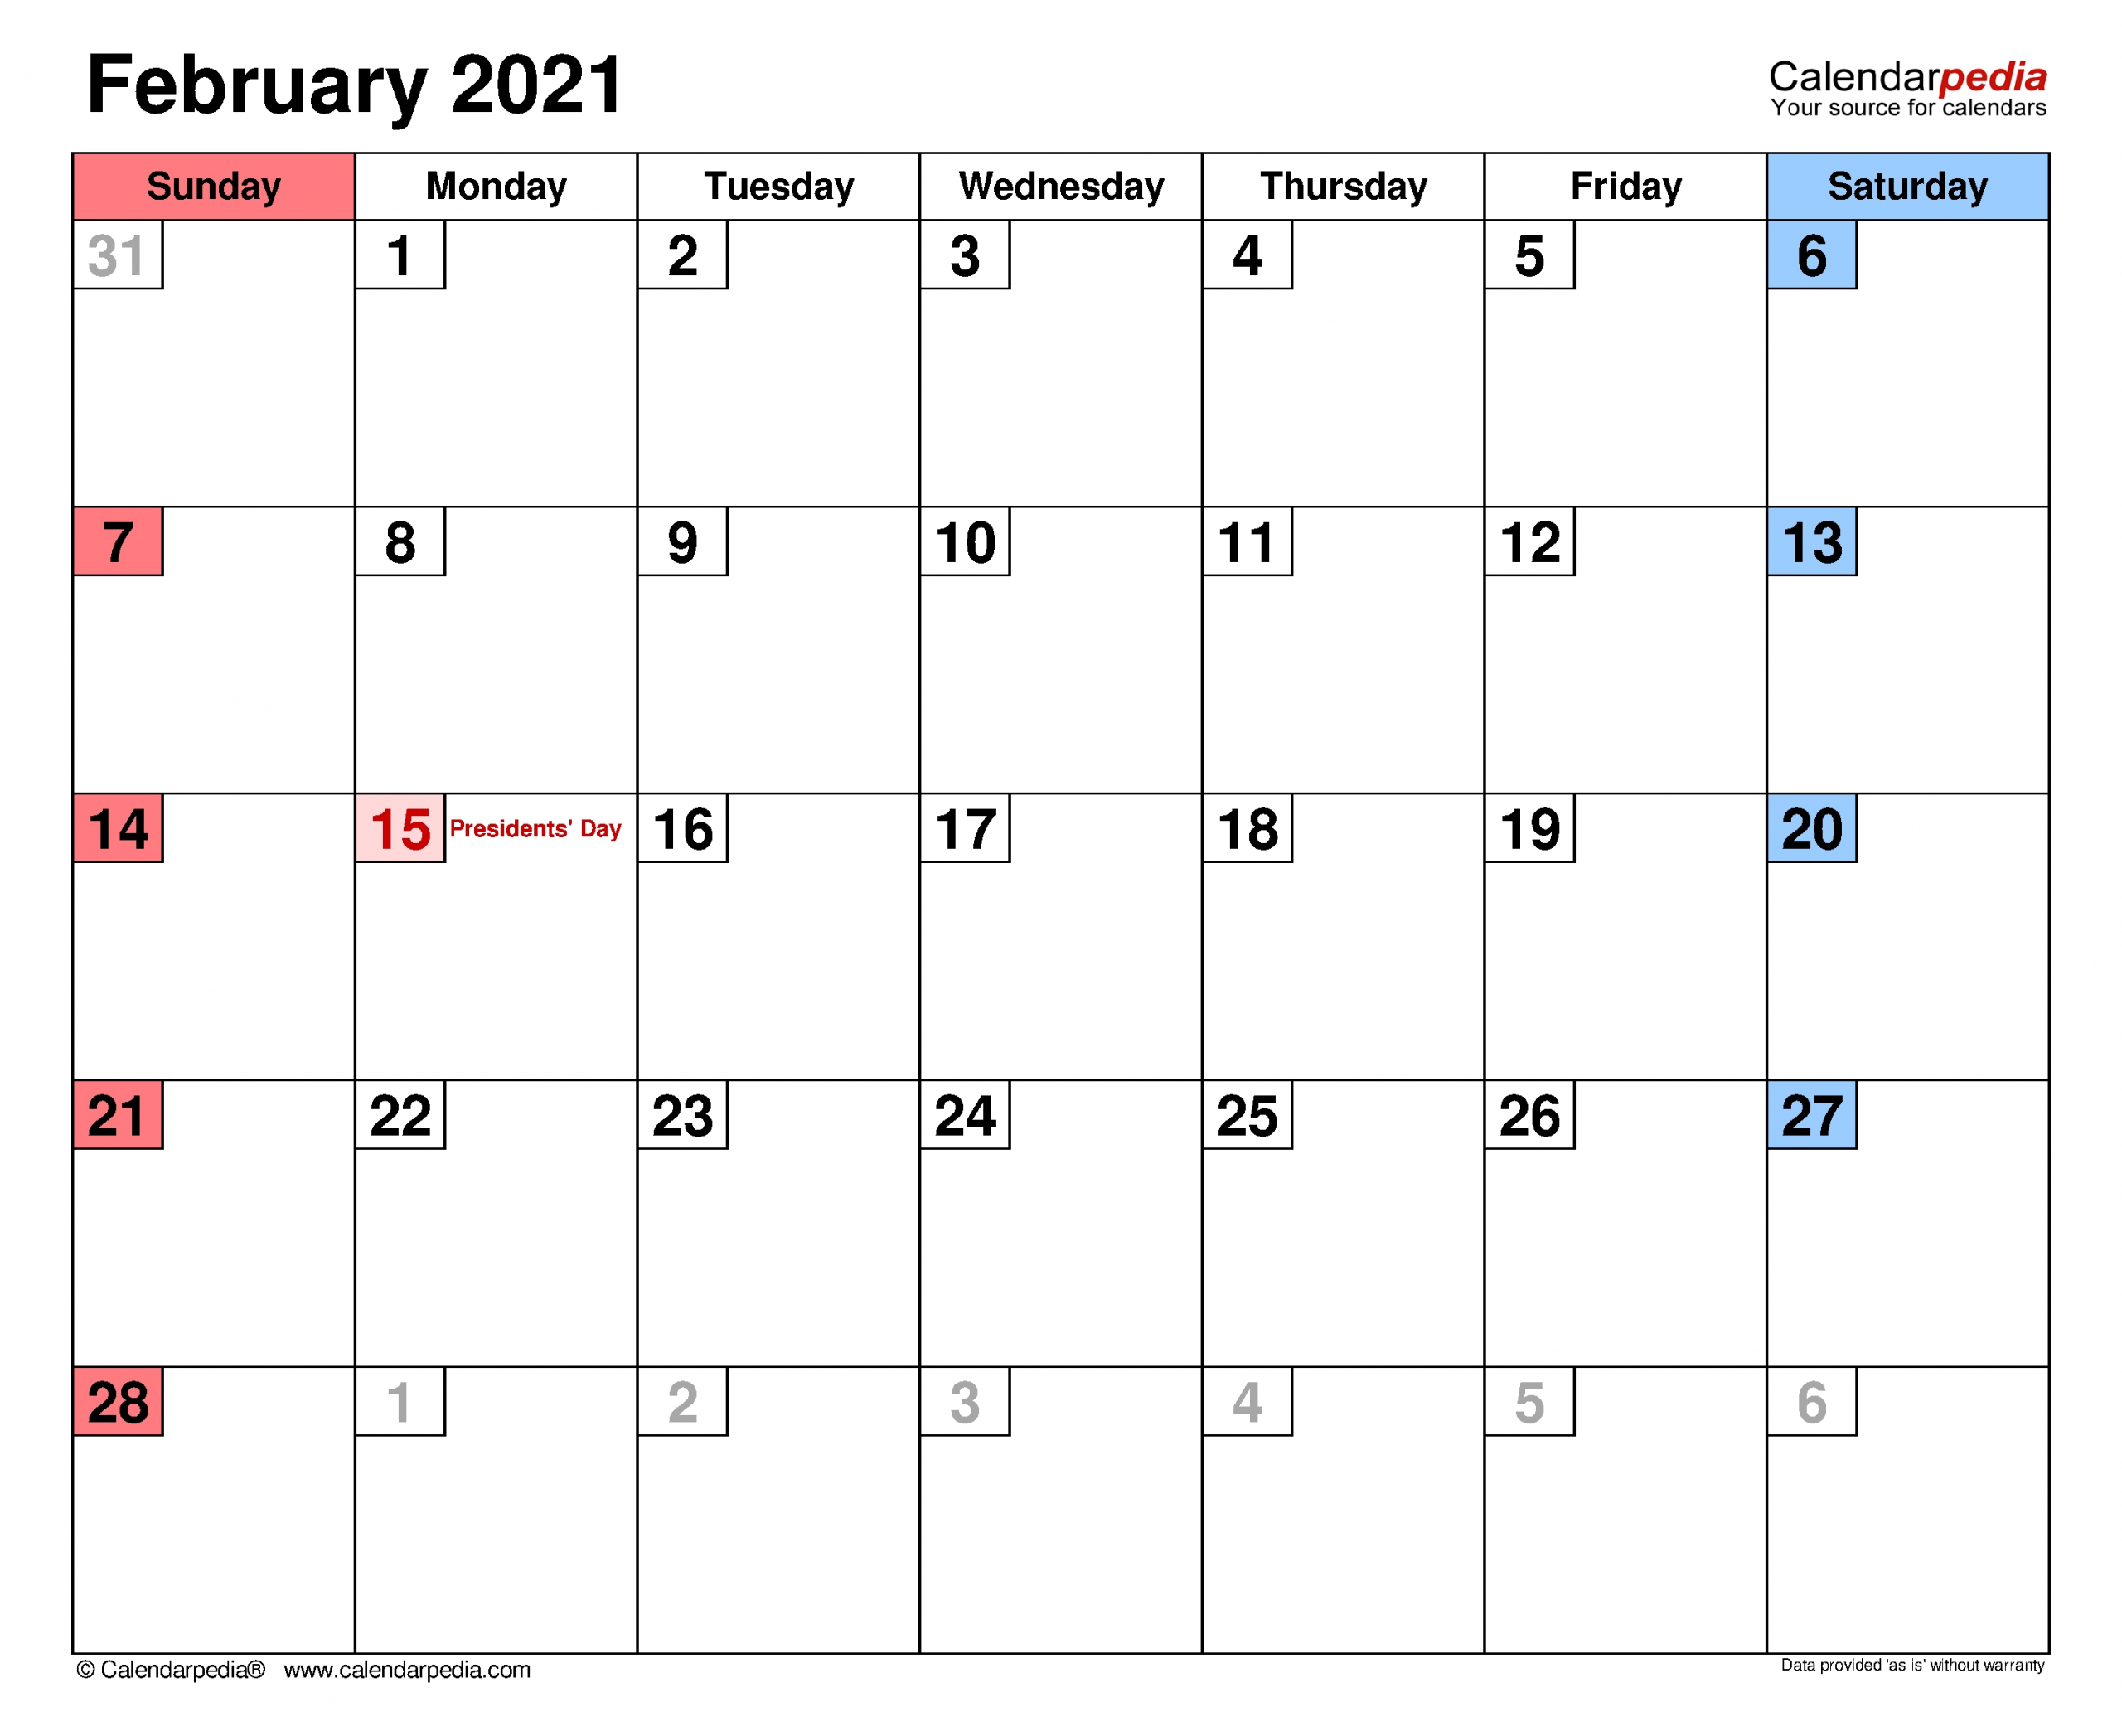 February 2021 Calendar | Templates For Word, Excel And Pdf